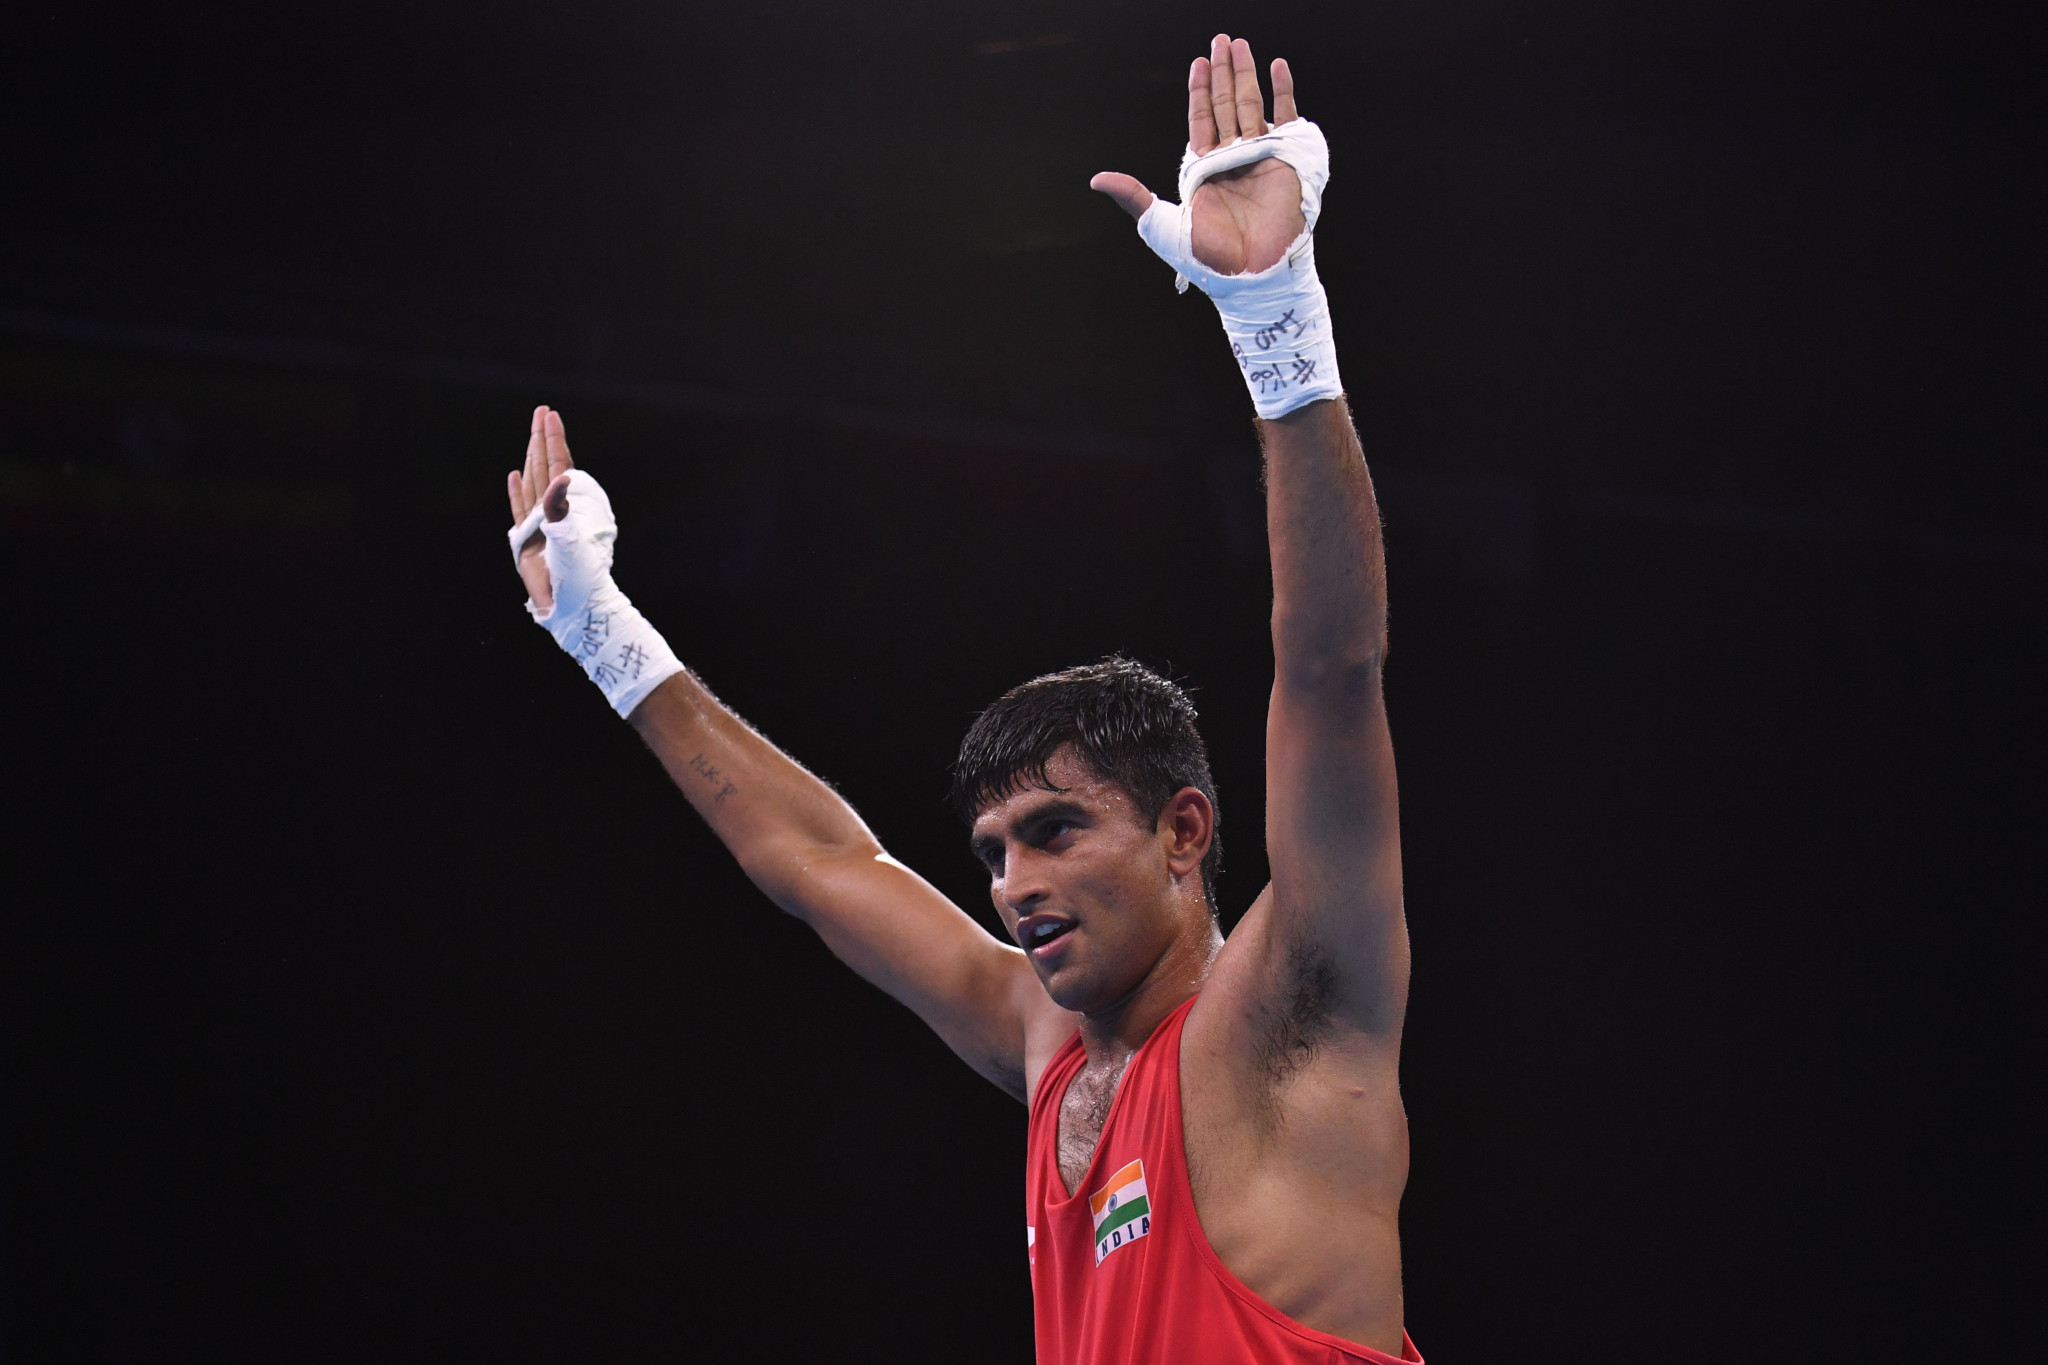 Boxing world bronze medallist Manish Kaushik revealed he is aiming for a gold medal at next year's Olympic Games in Tokyo ©Getty Images